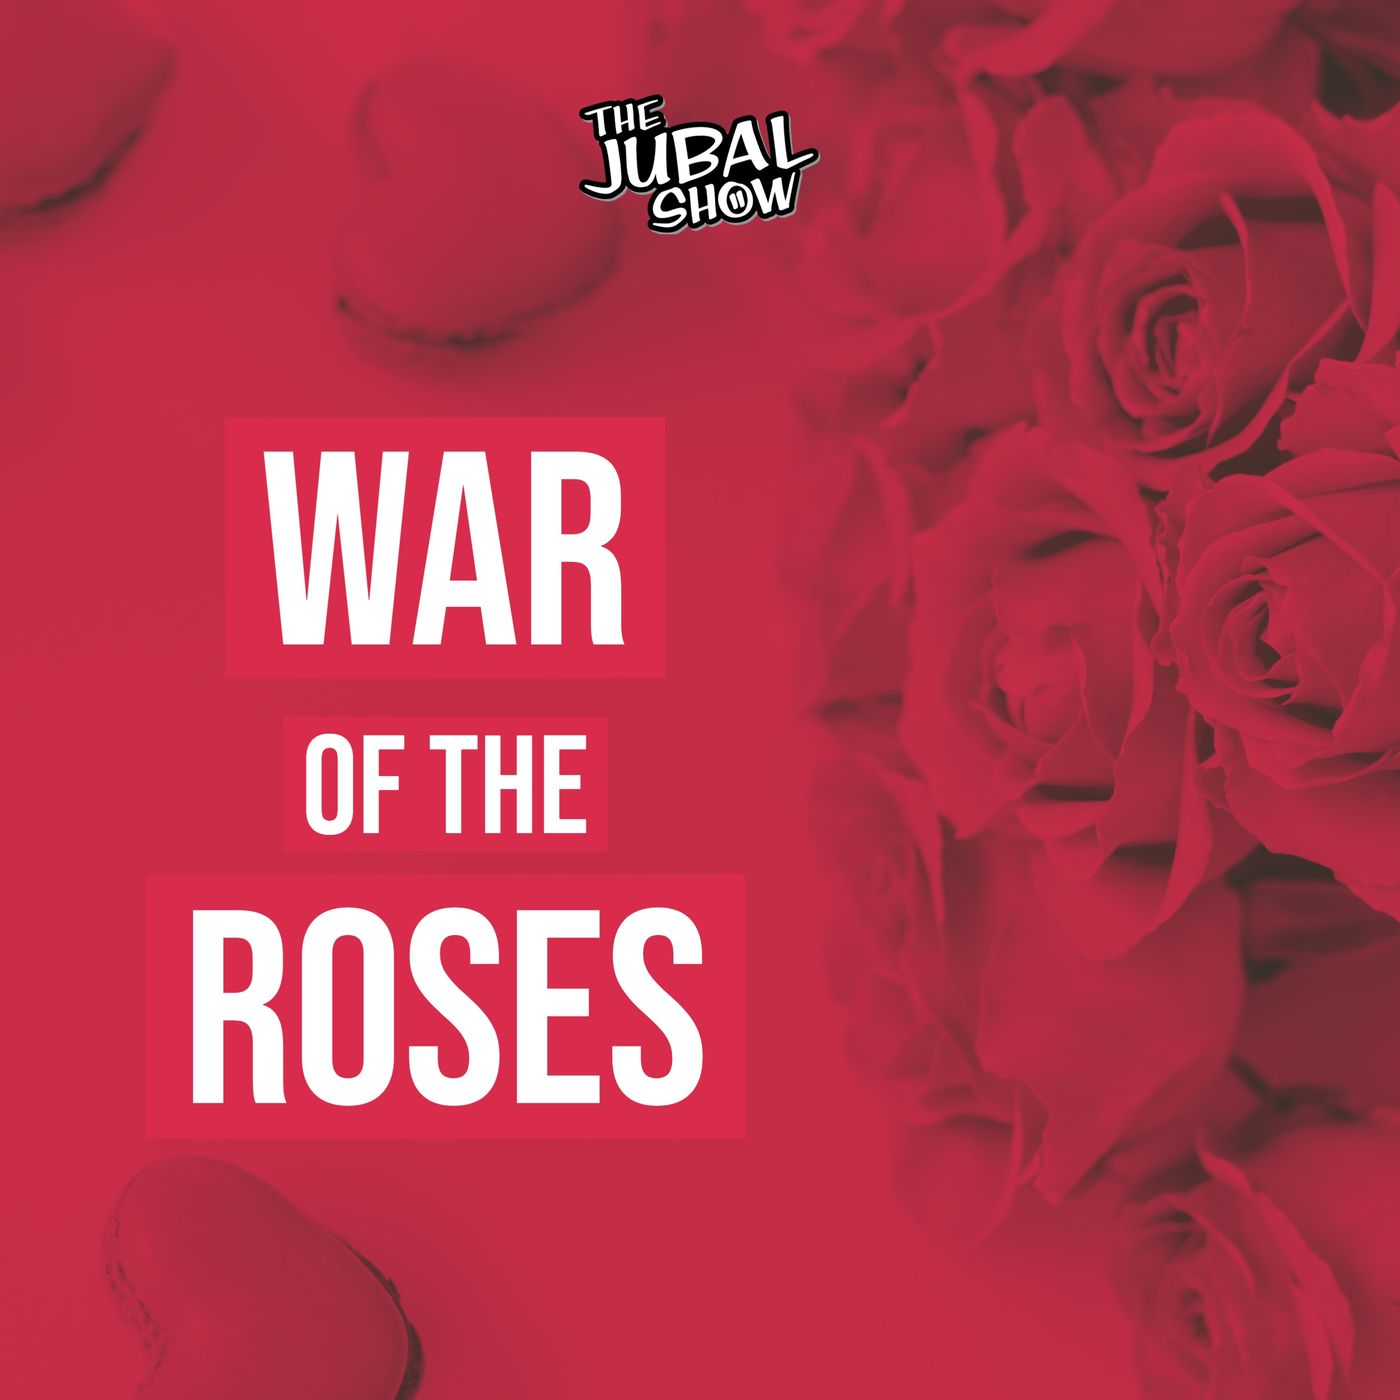 The Jubal Show finds a theme when catching cheaters in this War Of The Roses!